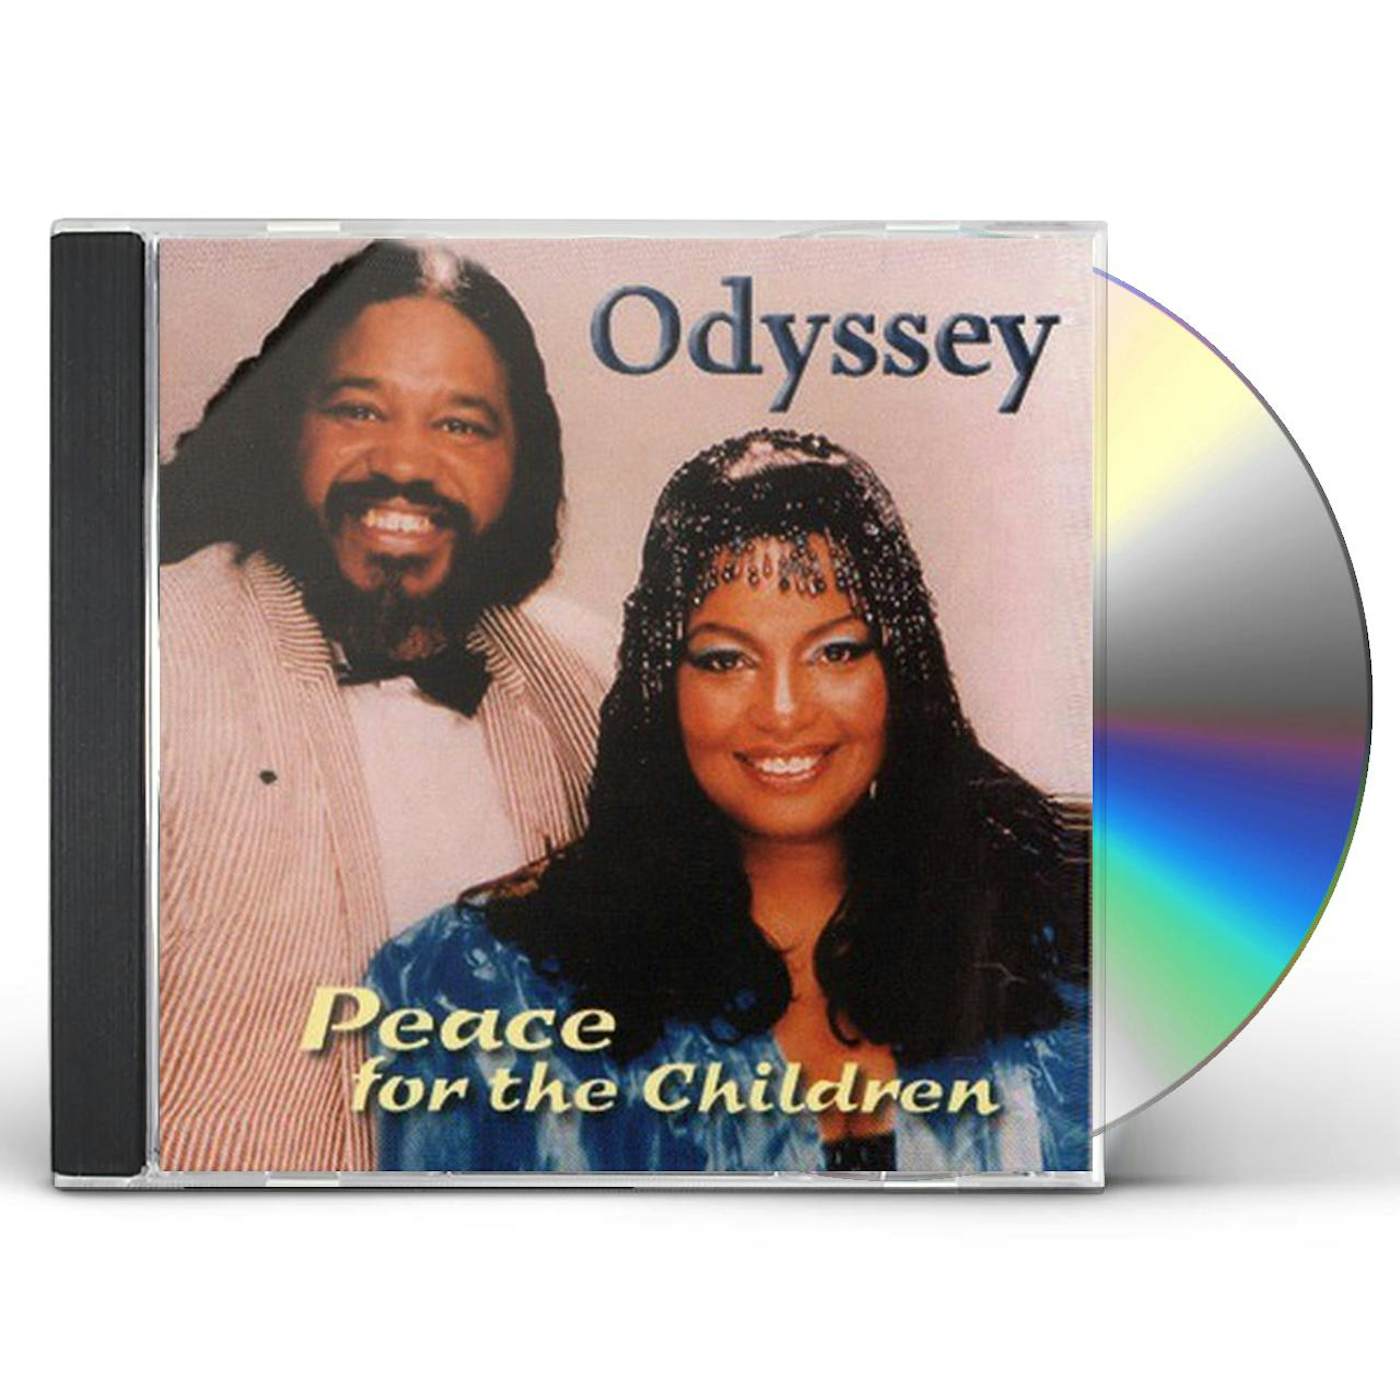 Odyssey PEACE FOR THE CHILDREN CD